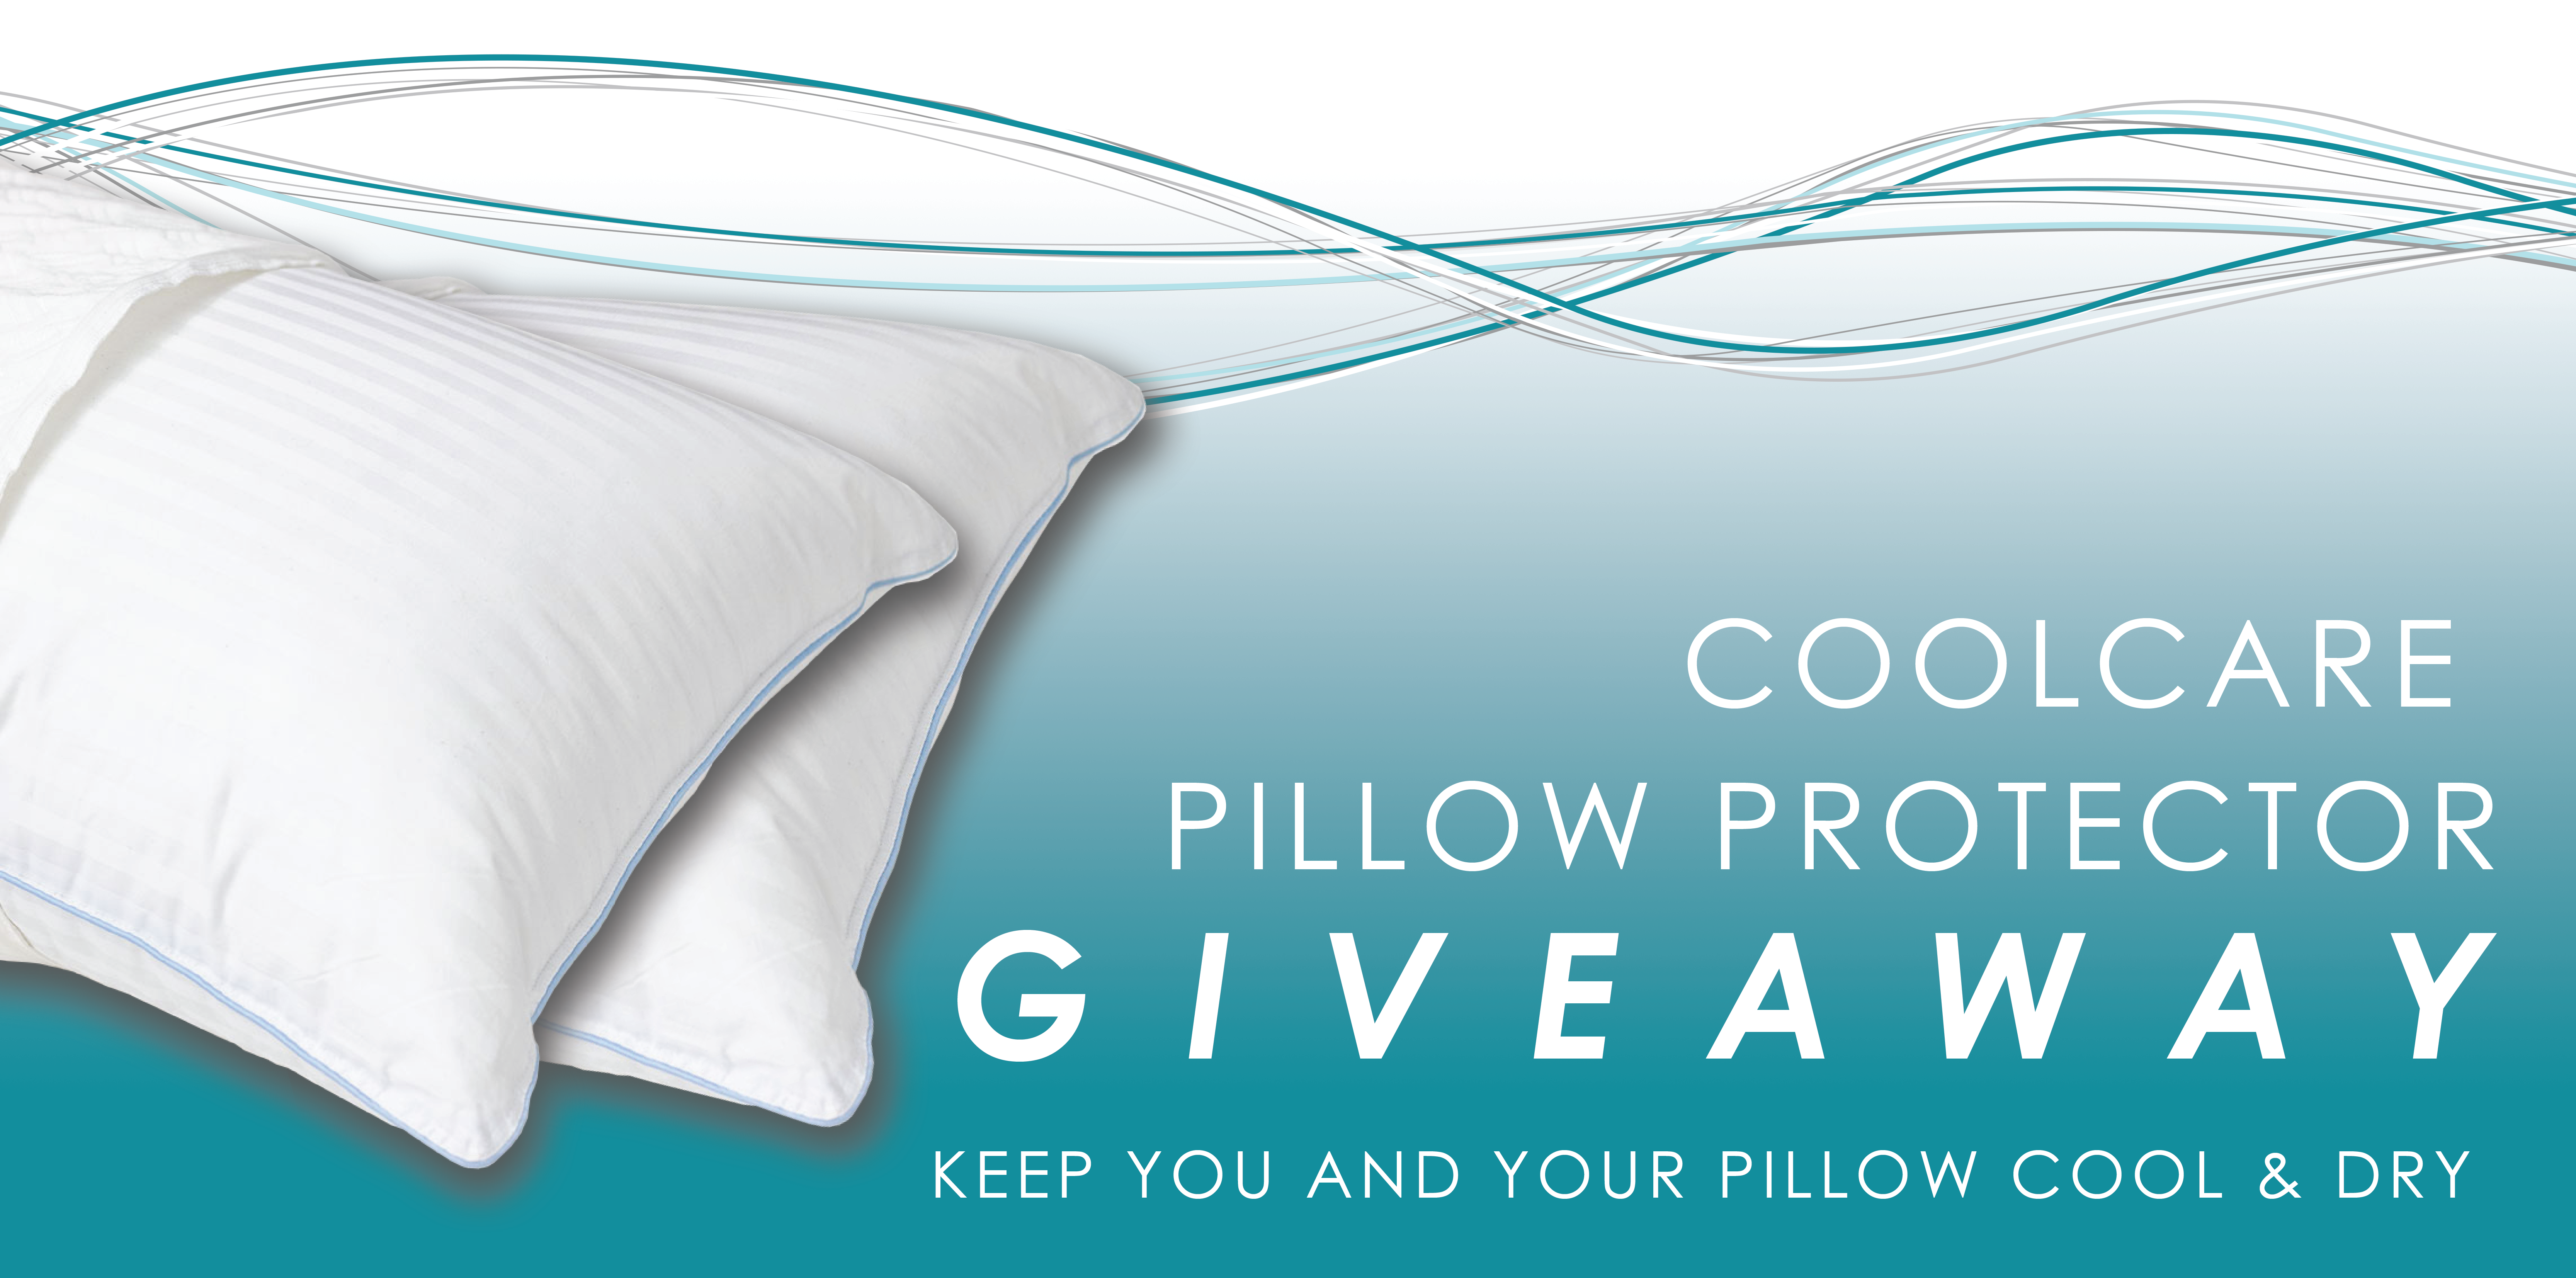 LiveSmart Coolcare Pillow Protector Giveaway